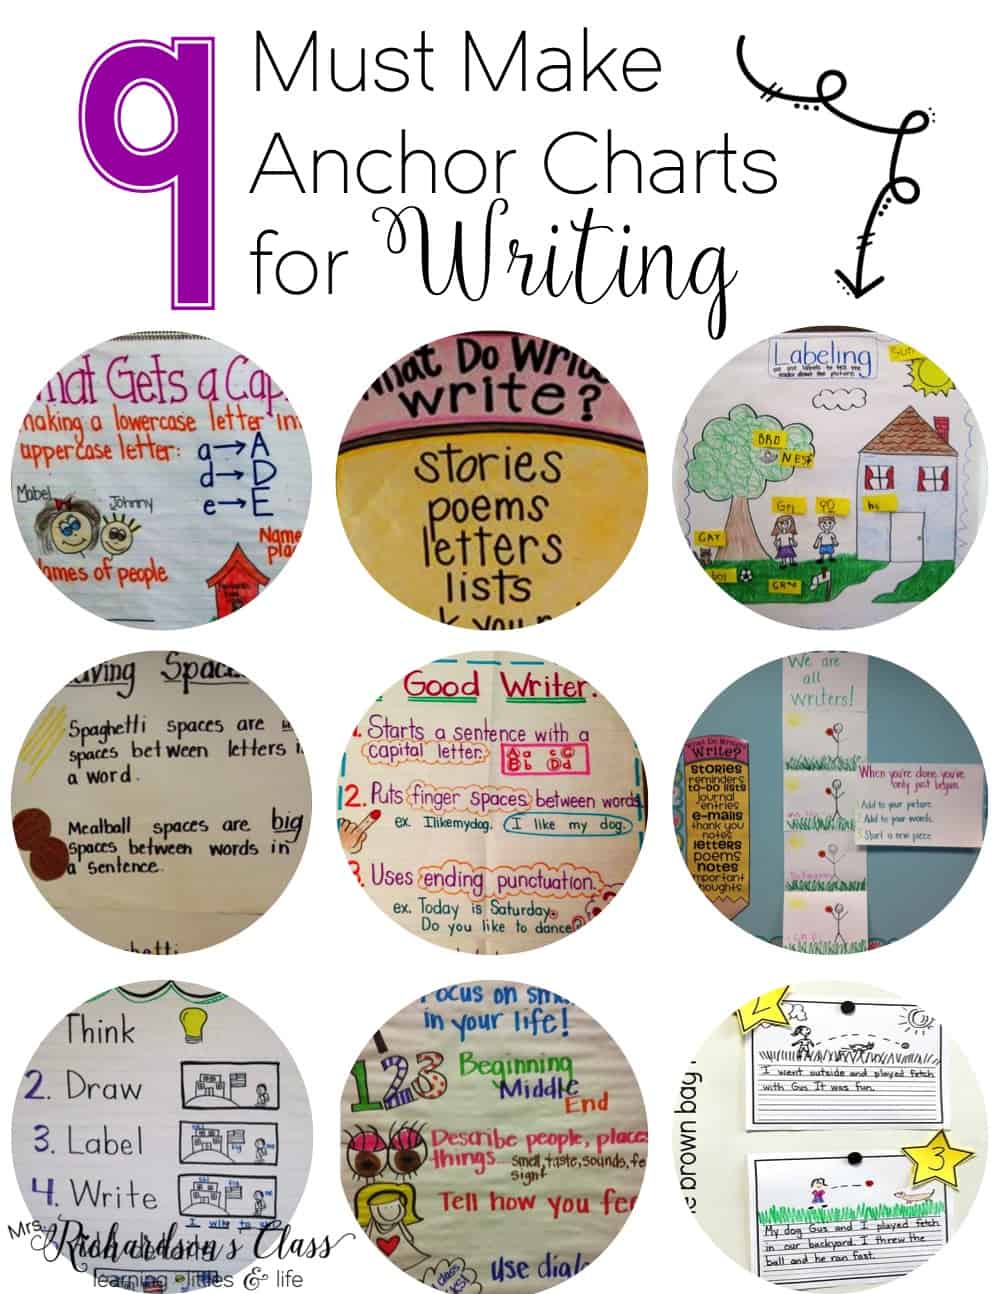 Capital Letter Anchor Chart